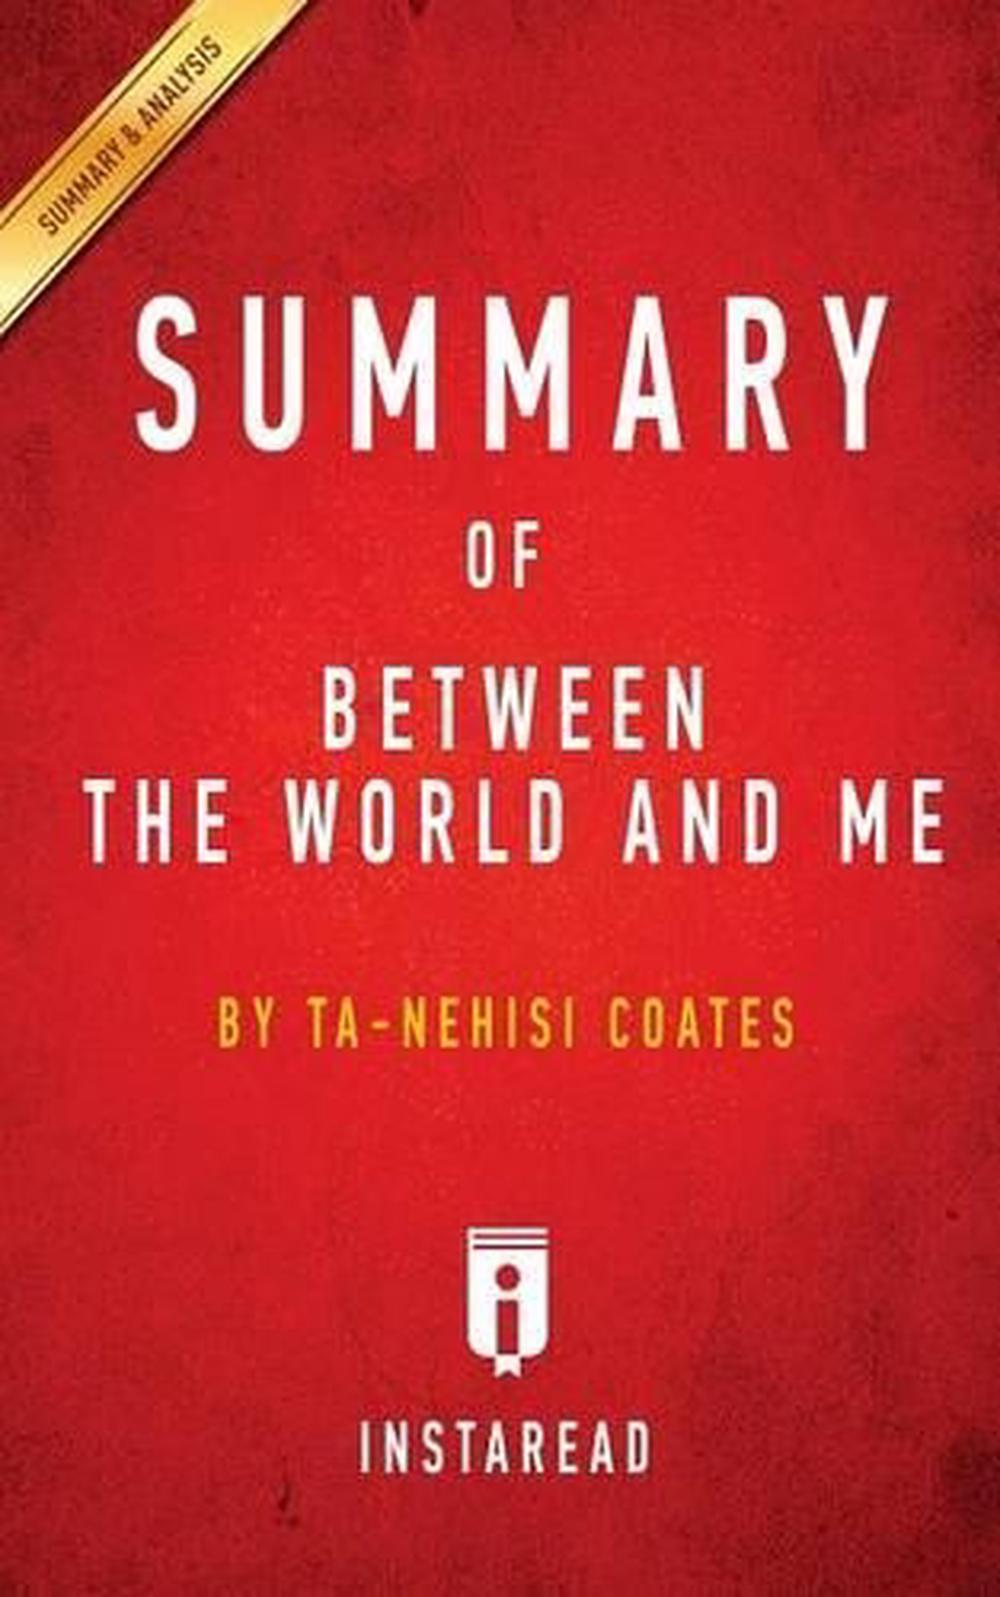 thesis of between the world and me